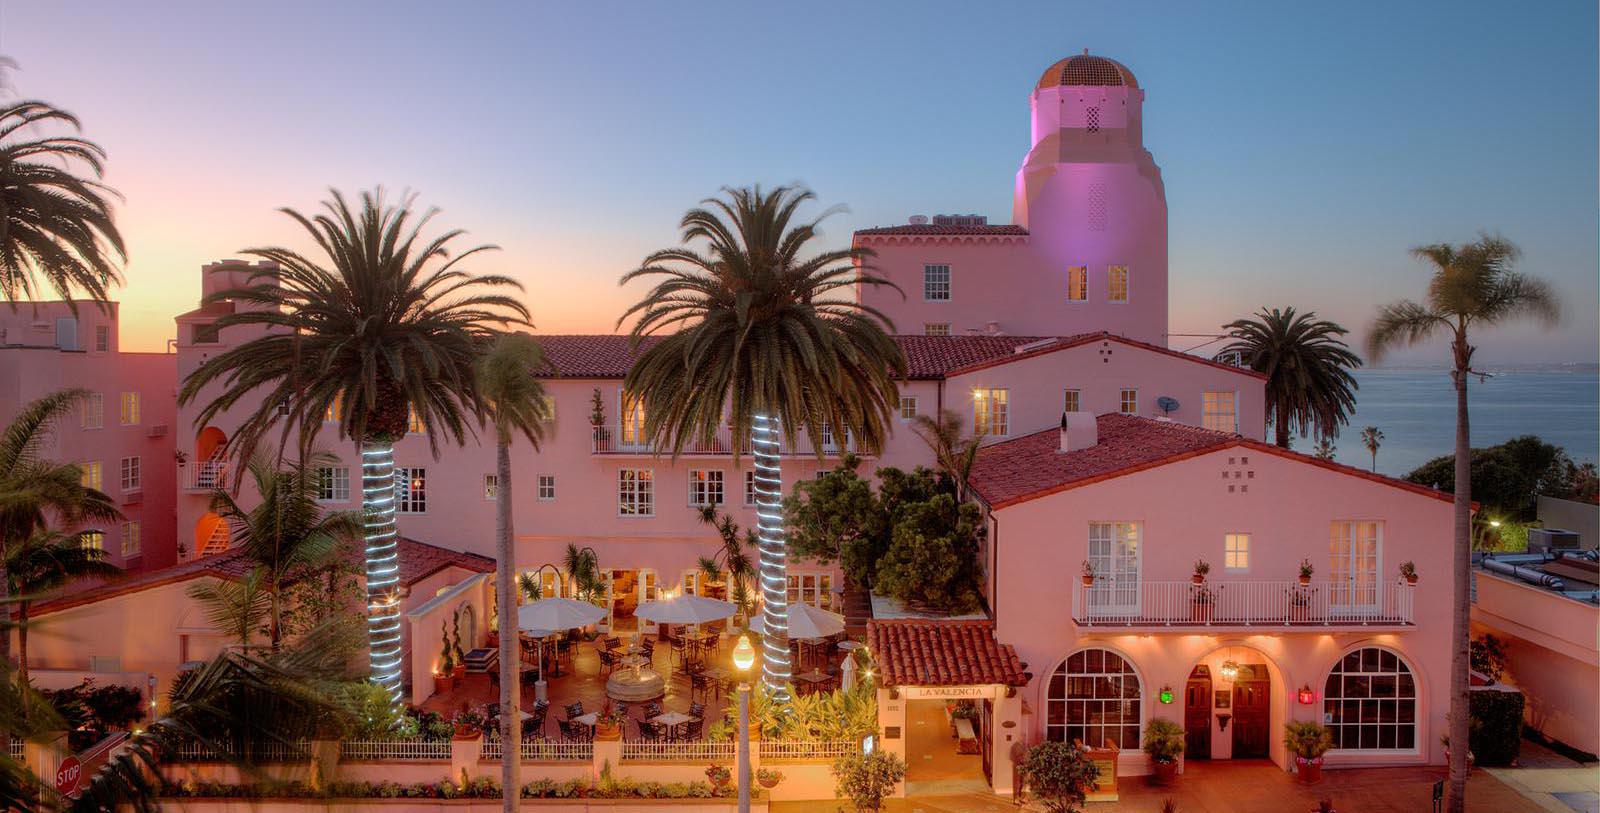 Image of Exterior at Night, La Valencia Hotel in La Jolla, Califronia, 1926, Member of Historic Hotels of America, Special Offers, Discounted Rates, Families, Romantic Escape, Honeymoons, Anniversaries, Reunions